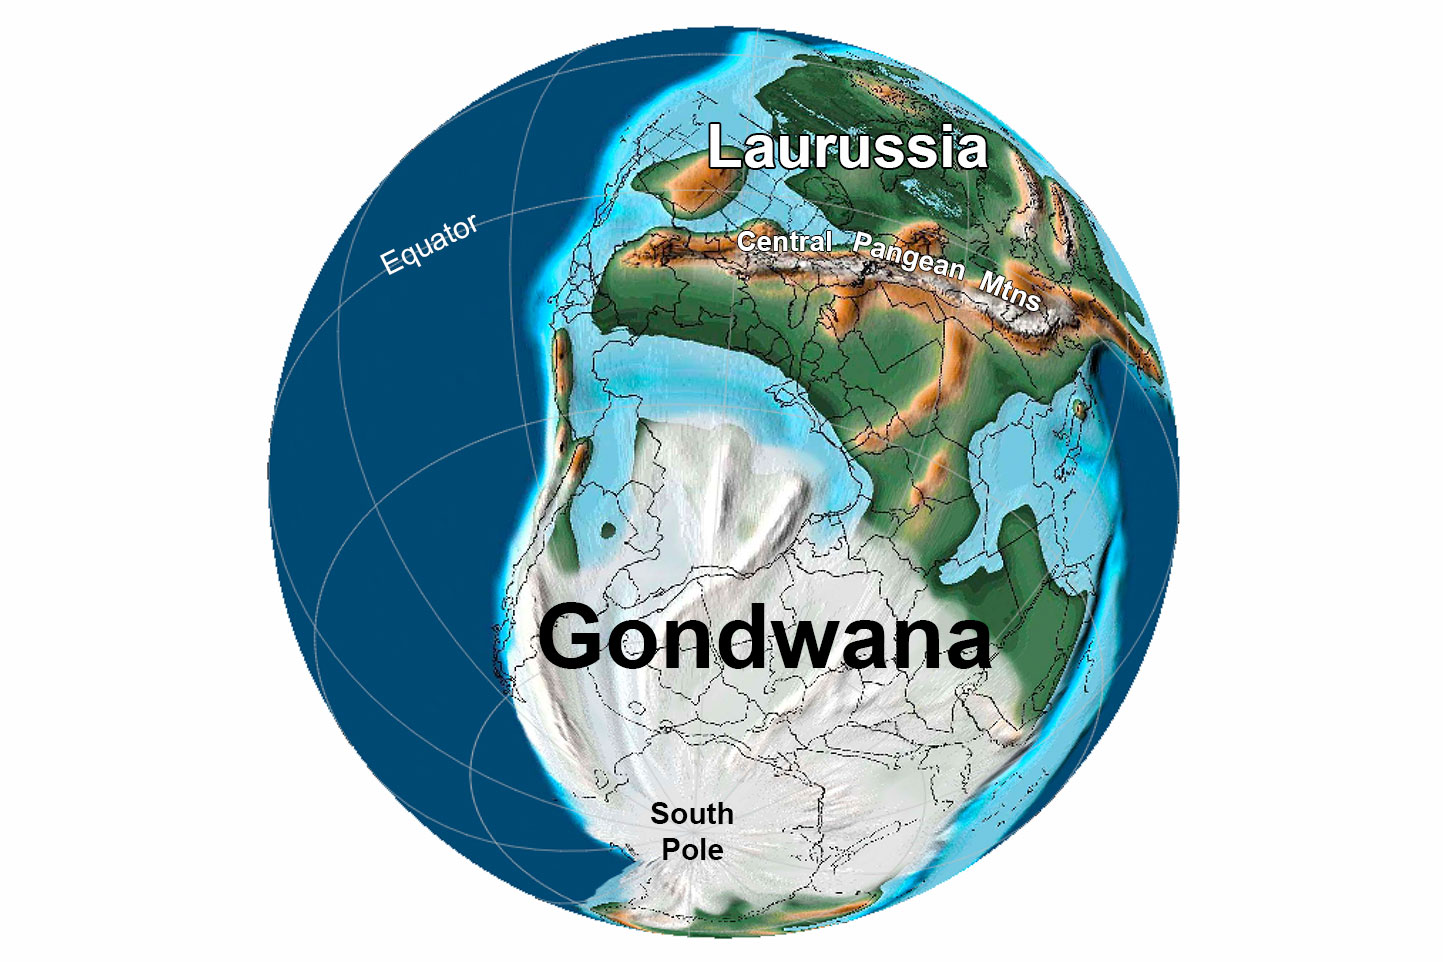 Reconstruction of Earth 300 million years ago showing Gondwana glaciation and Central Pangean Mountains.